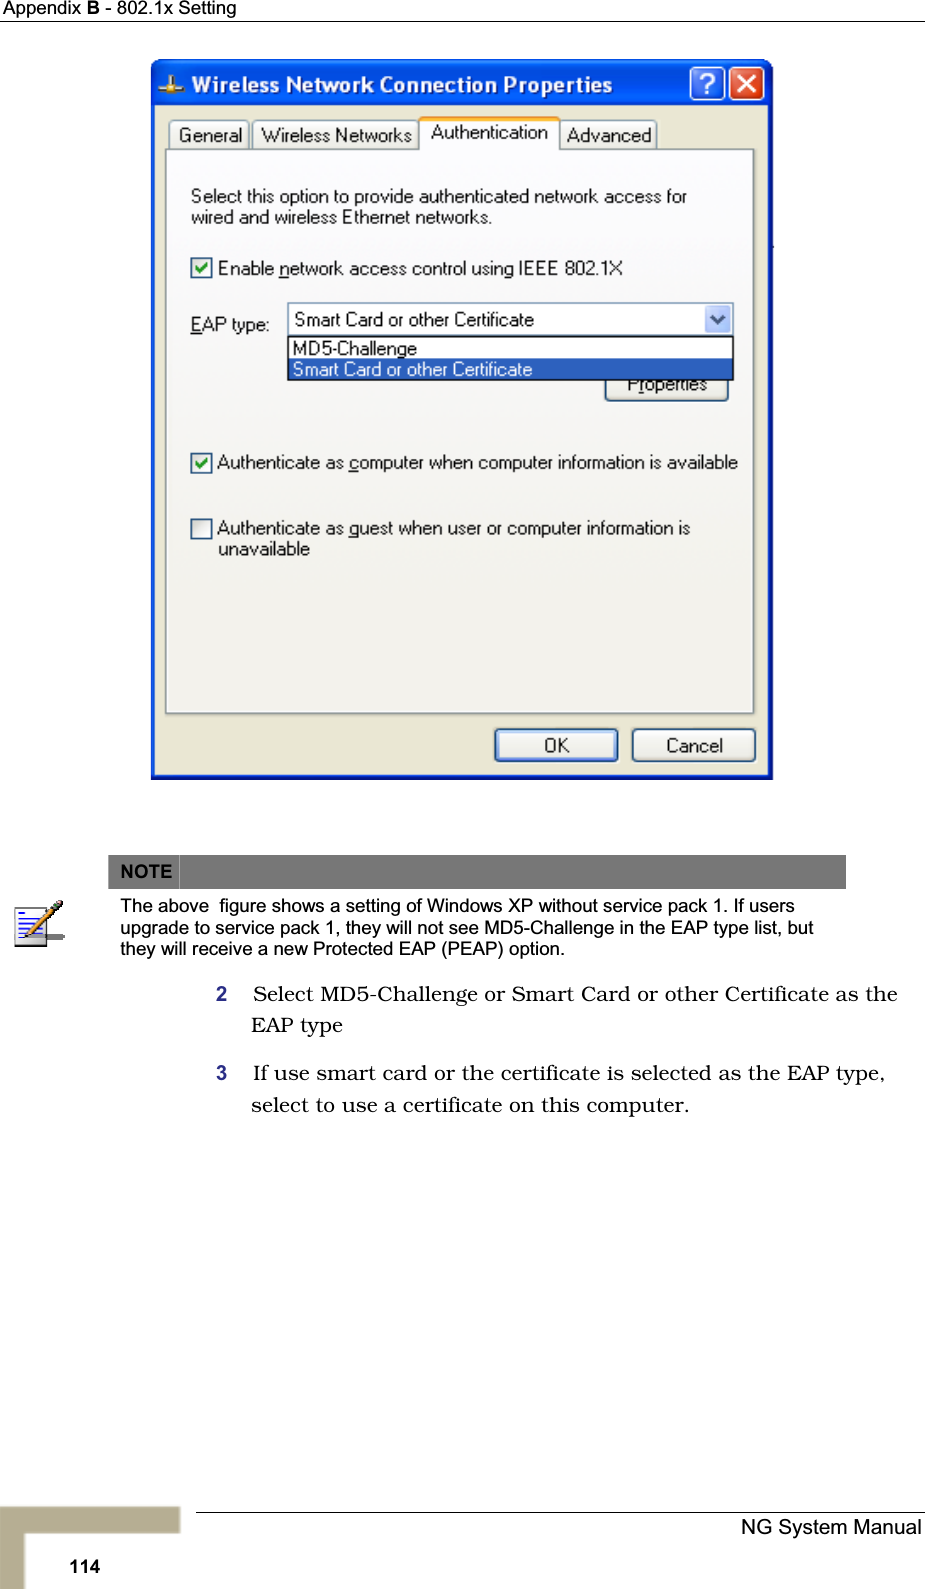 Appendix B - 802.1x SettingNOTEThe above  figure shows a setting of Windows XP without service pack 1. If users upgrade to service pack 1, they will not see MD5-Challenge in the EAP type list, but they will receive a new Protected EAP (PEAP) option. 2Select MD5-Challenge or Smart Card or other Certificate as theEAP type 3If use smart card or the certificate is selected as the EAP type,select to use a certificate on this computer.NG System Manual114